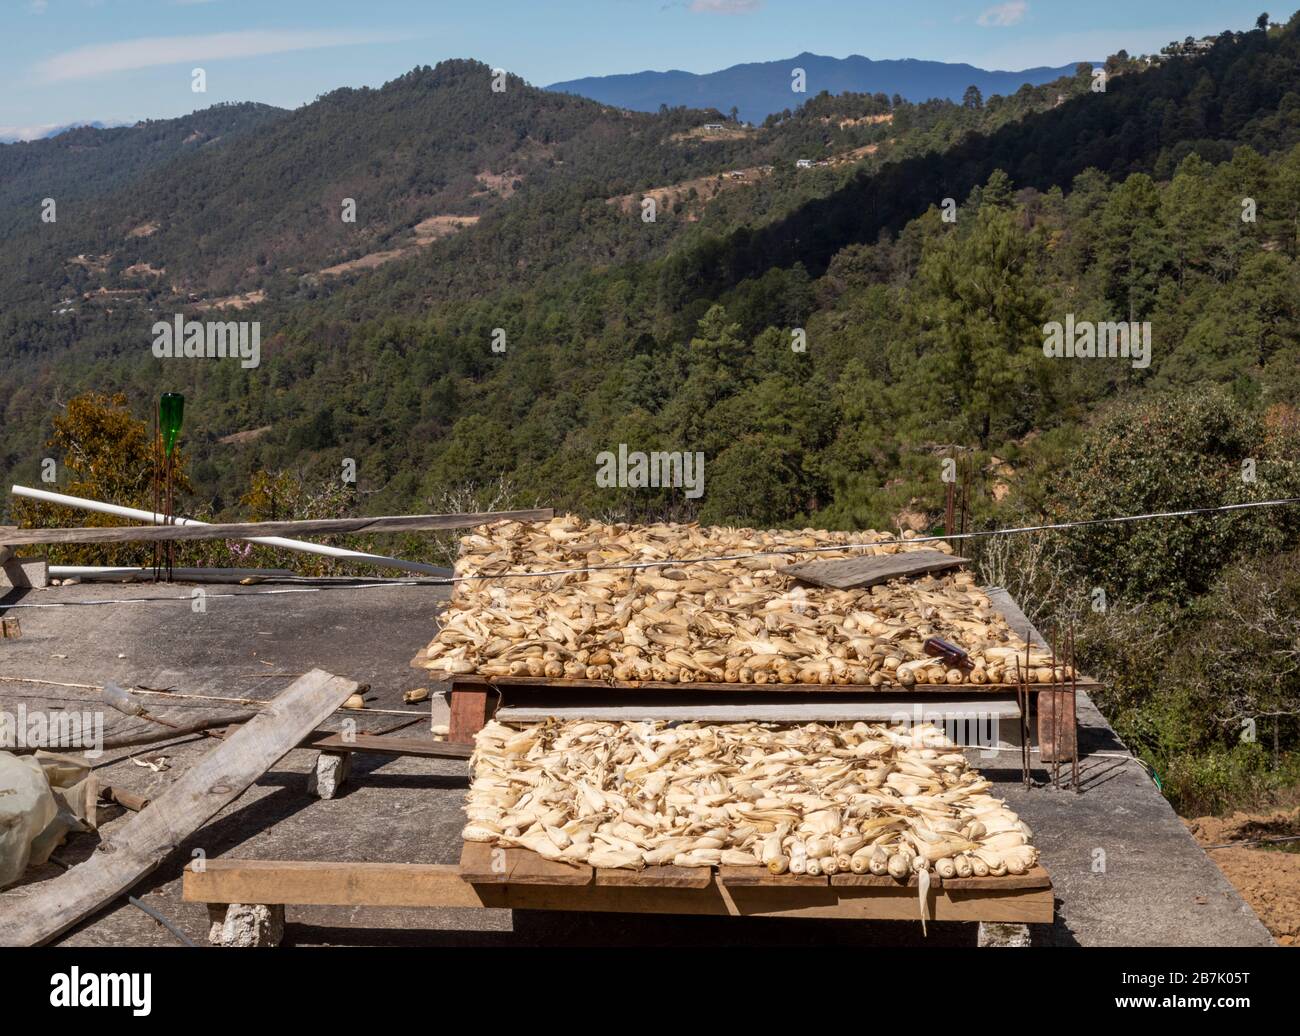 Latuvi, Oaxaca, Mexico - Corn dries on the roof of a house in the Sierra Norte mountains. Corn is the main subsistence crop in the region's Zapotec vi Stock Photo